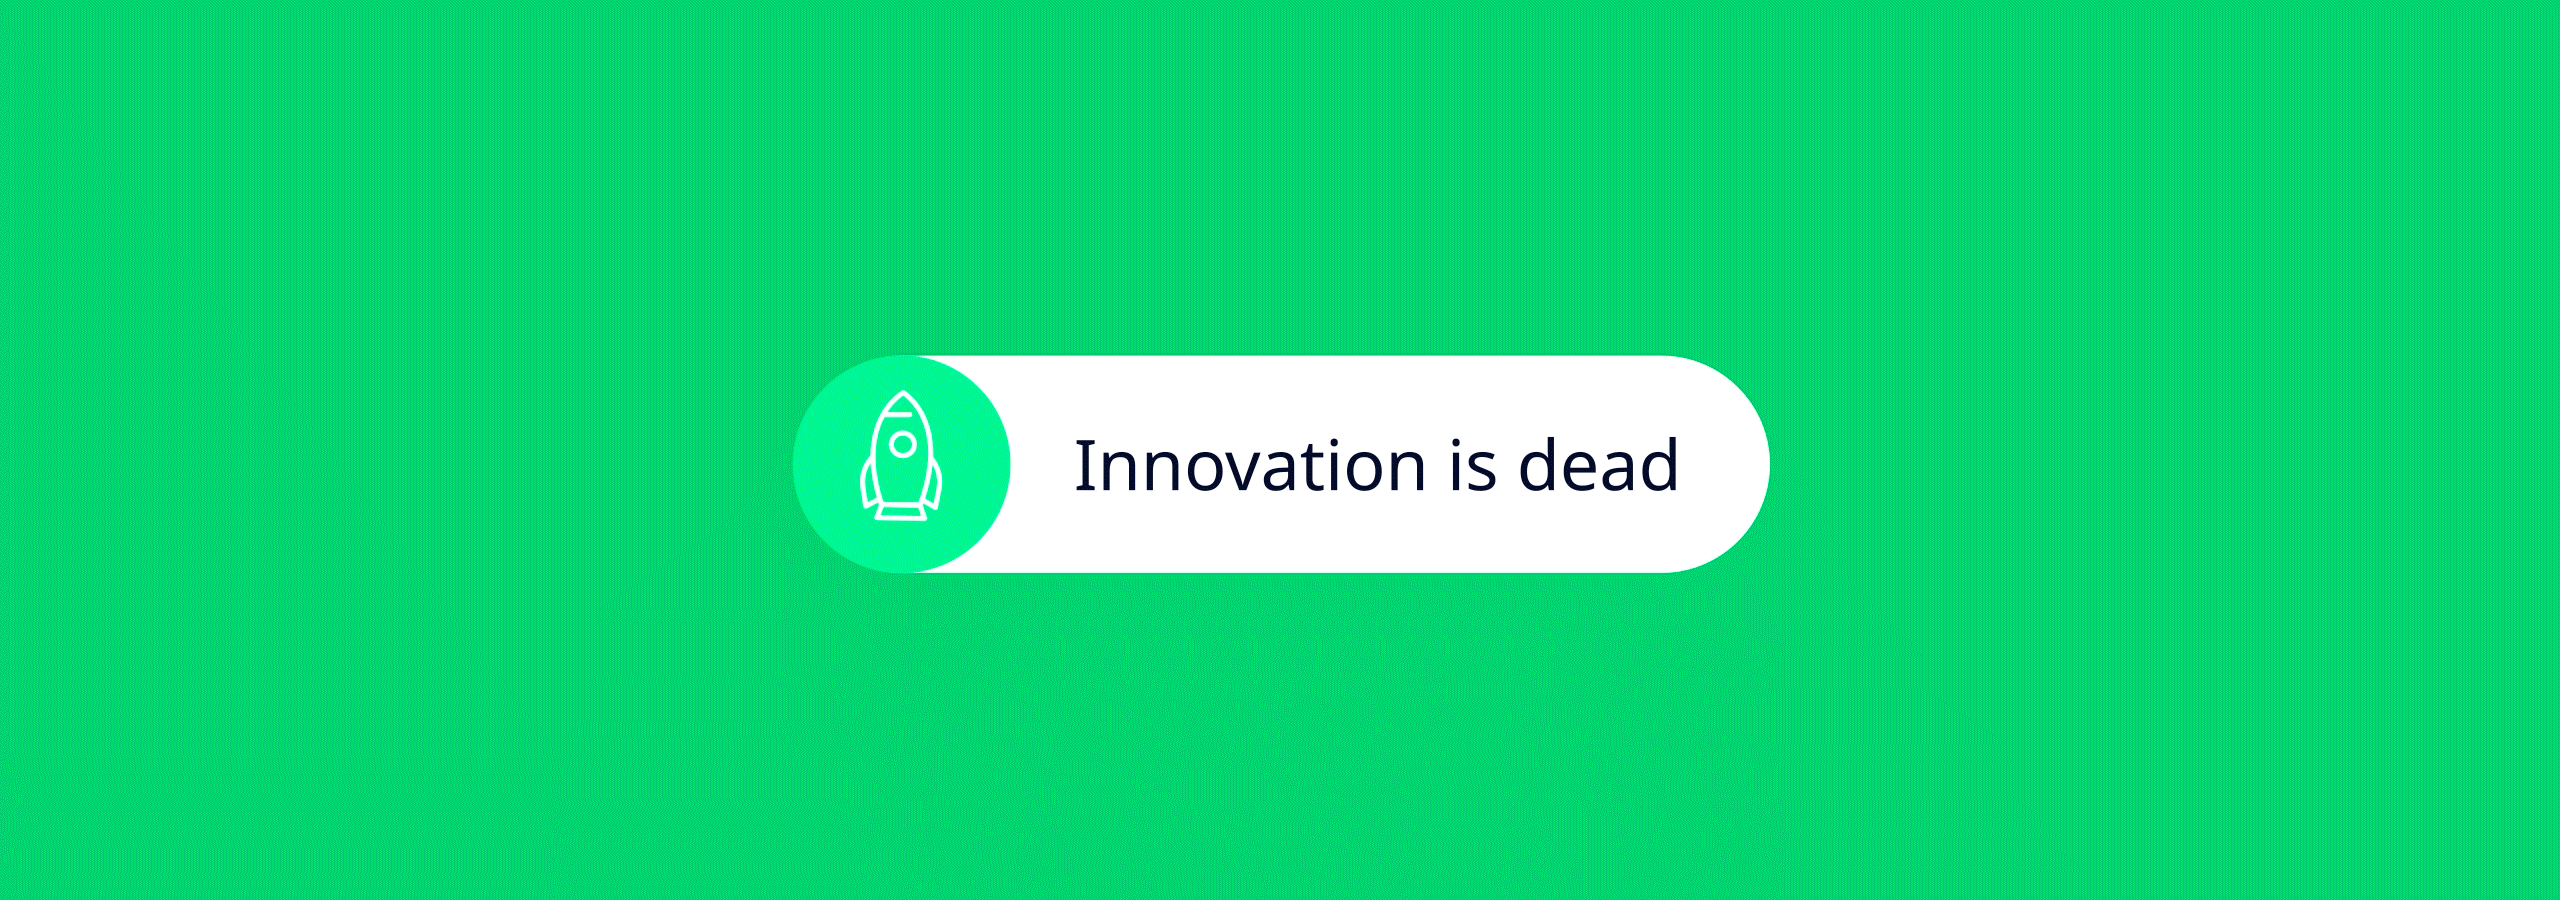 Innovation is dead serious business